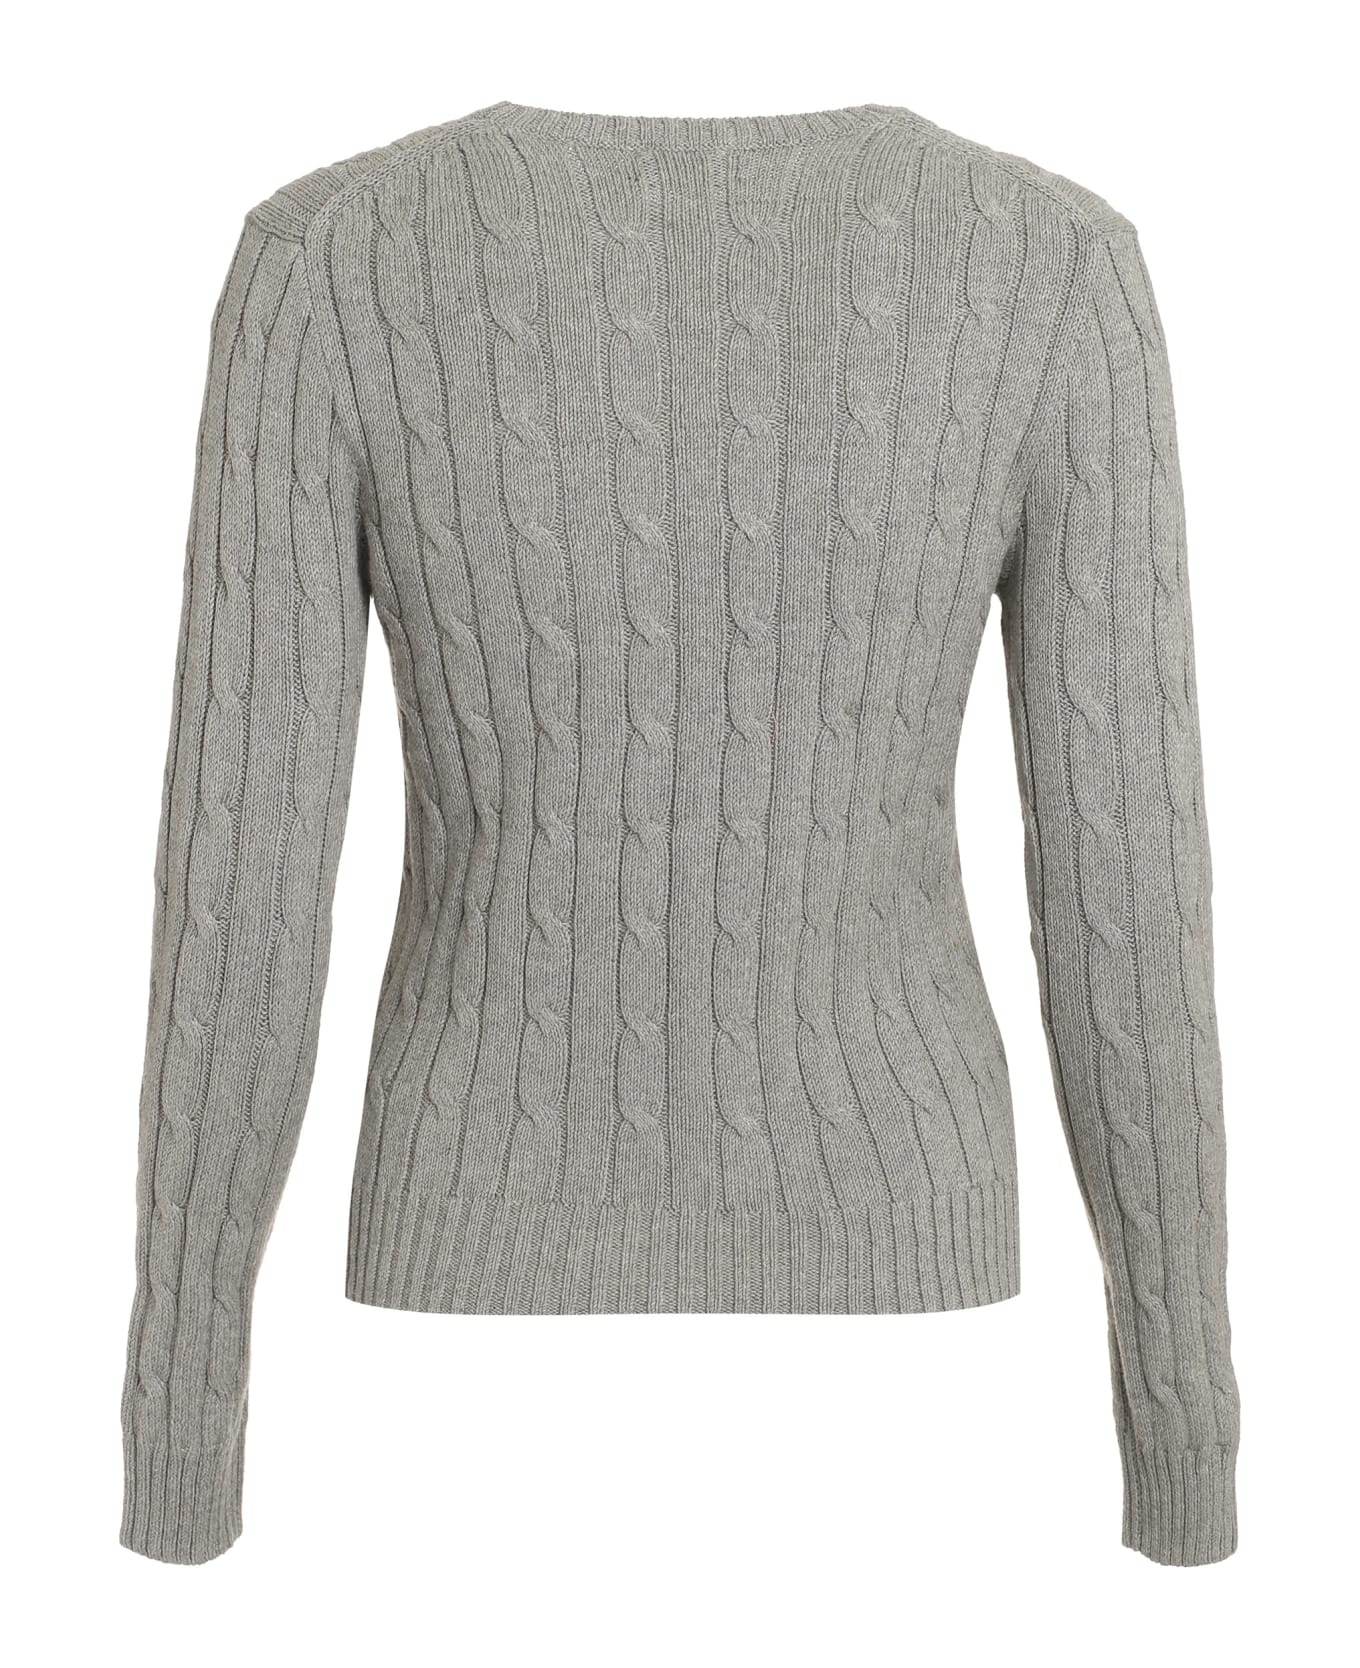 Polo Ralph Lauren Cable Knit Sweater - grey ニットウェア